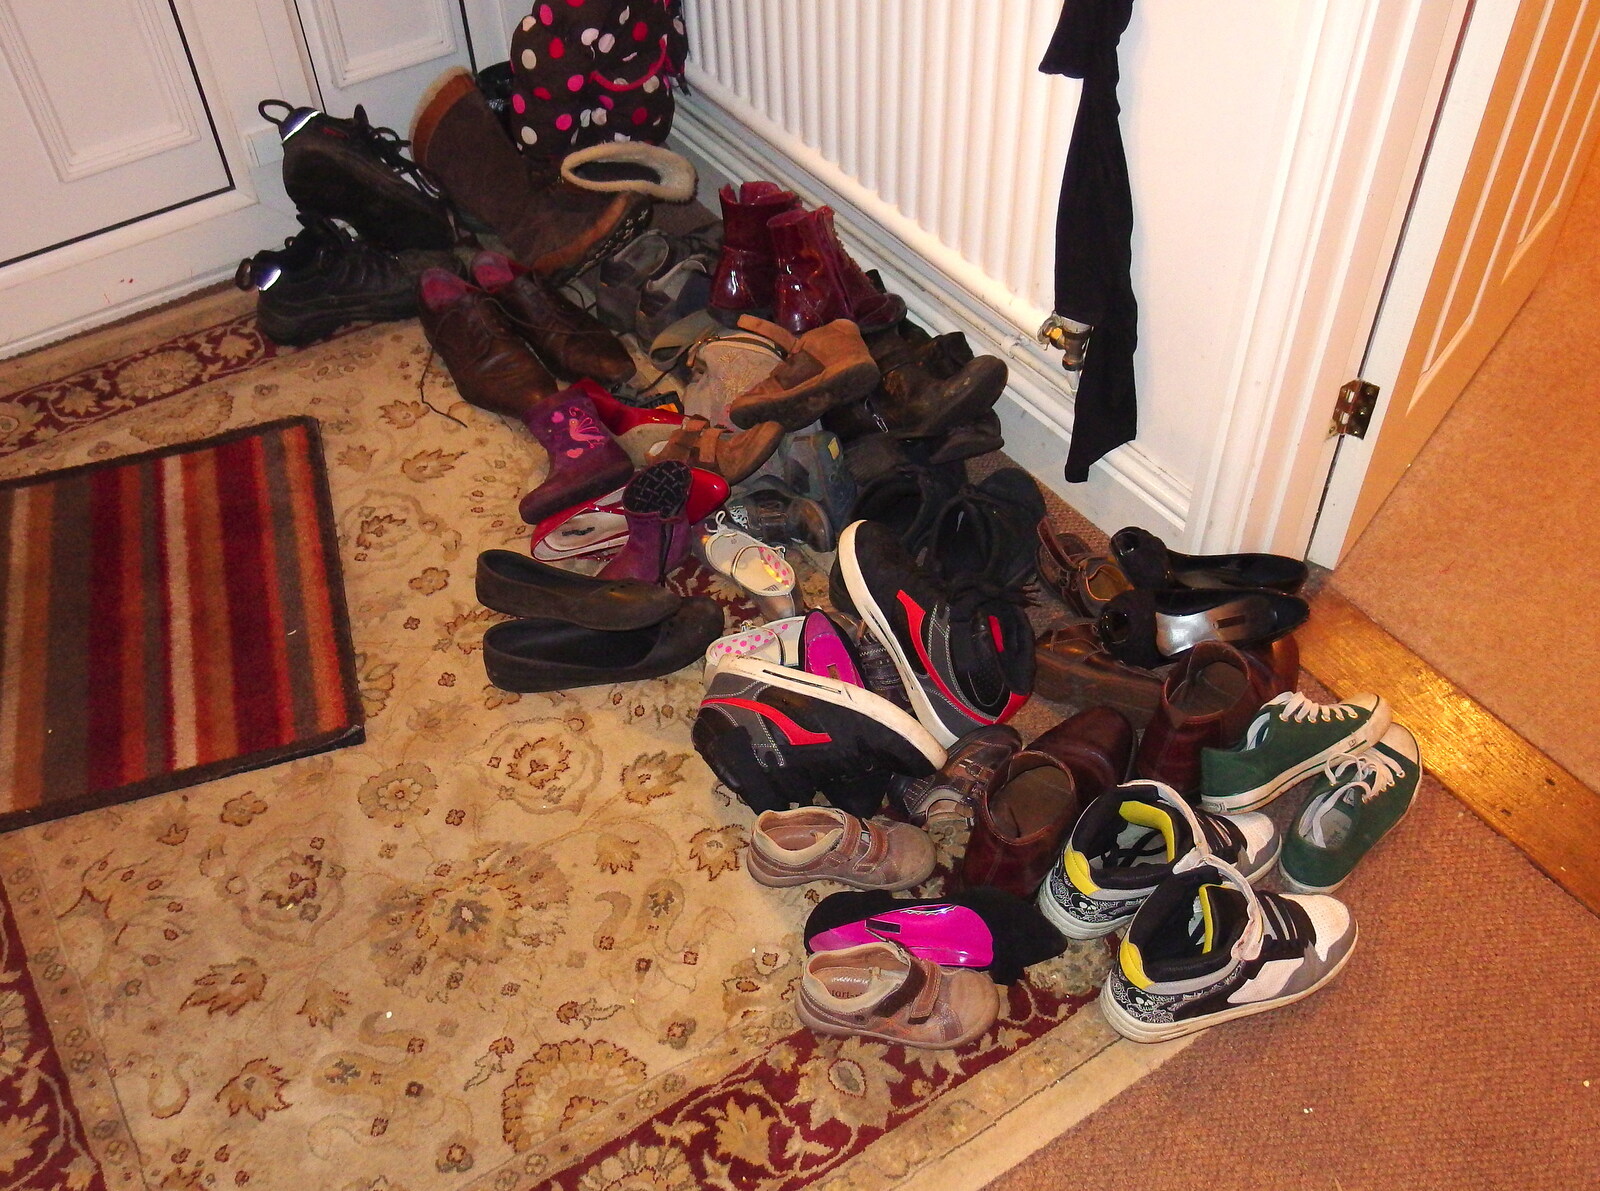 There's a small pile of shoes by the door from A Christmas Party, Brome, Suffolk - 21st December 2013